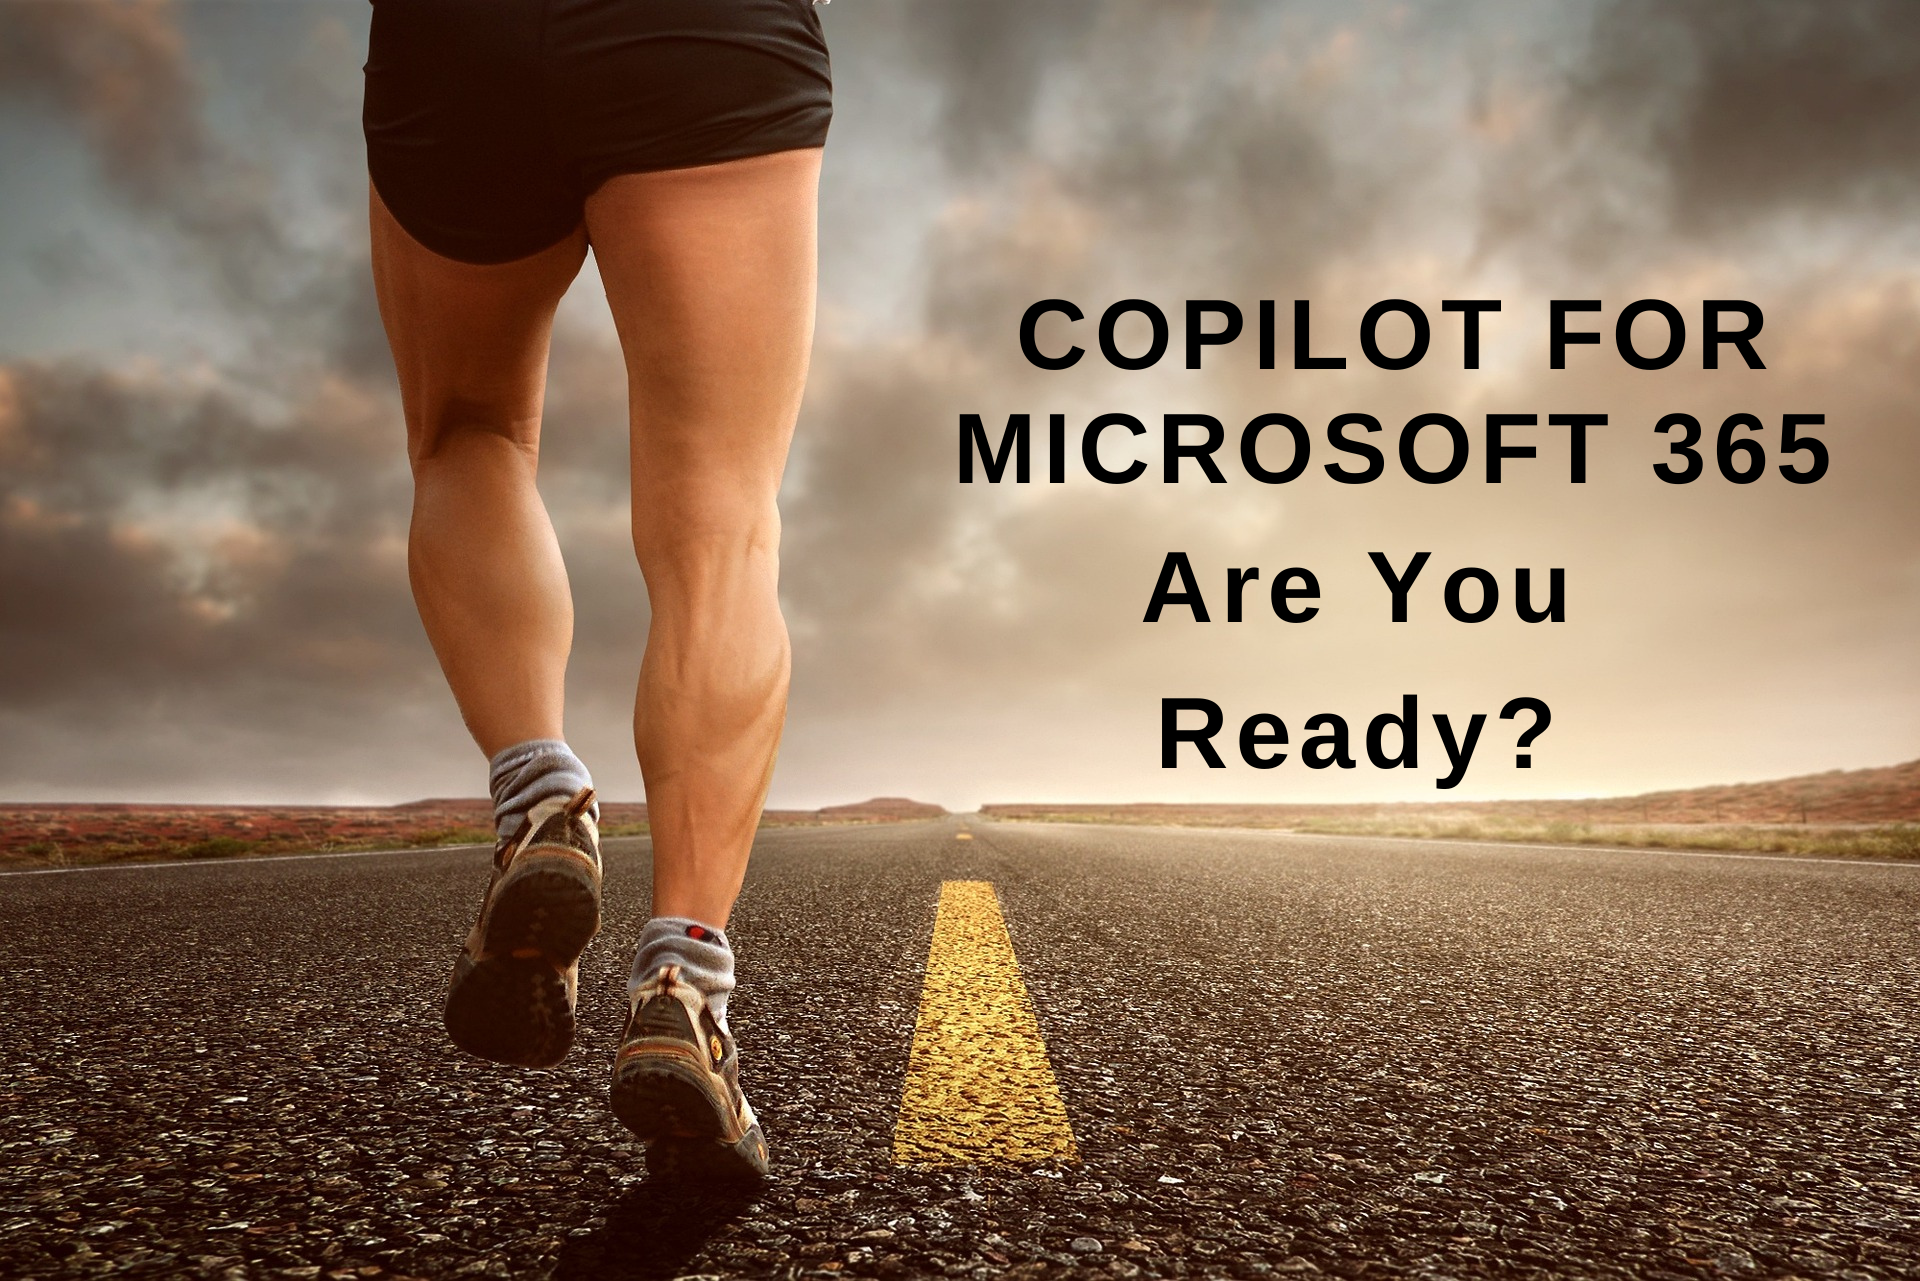 Copilot for Microsoft 365 Are You Ready